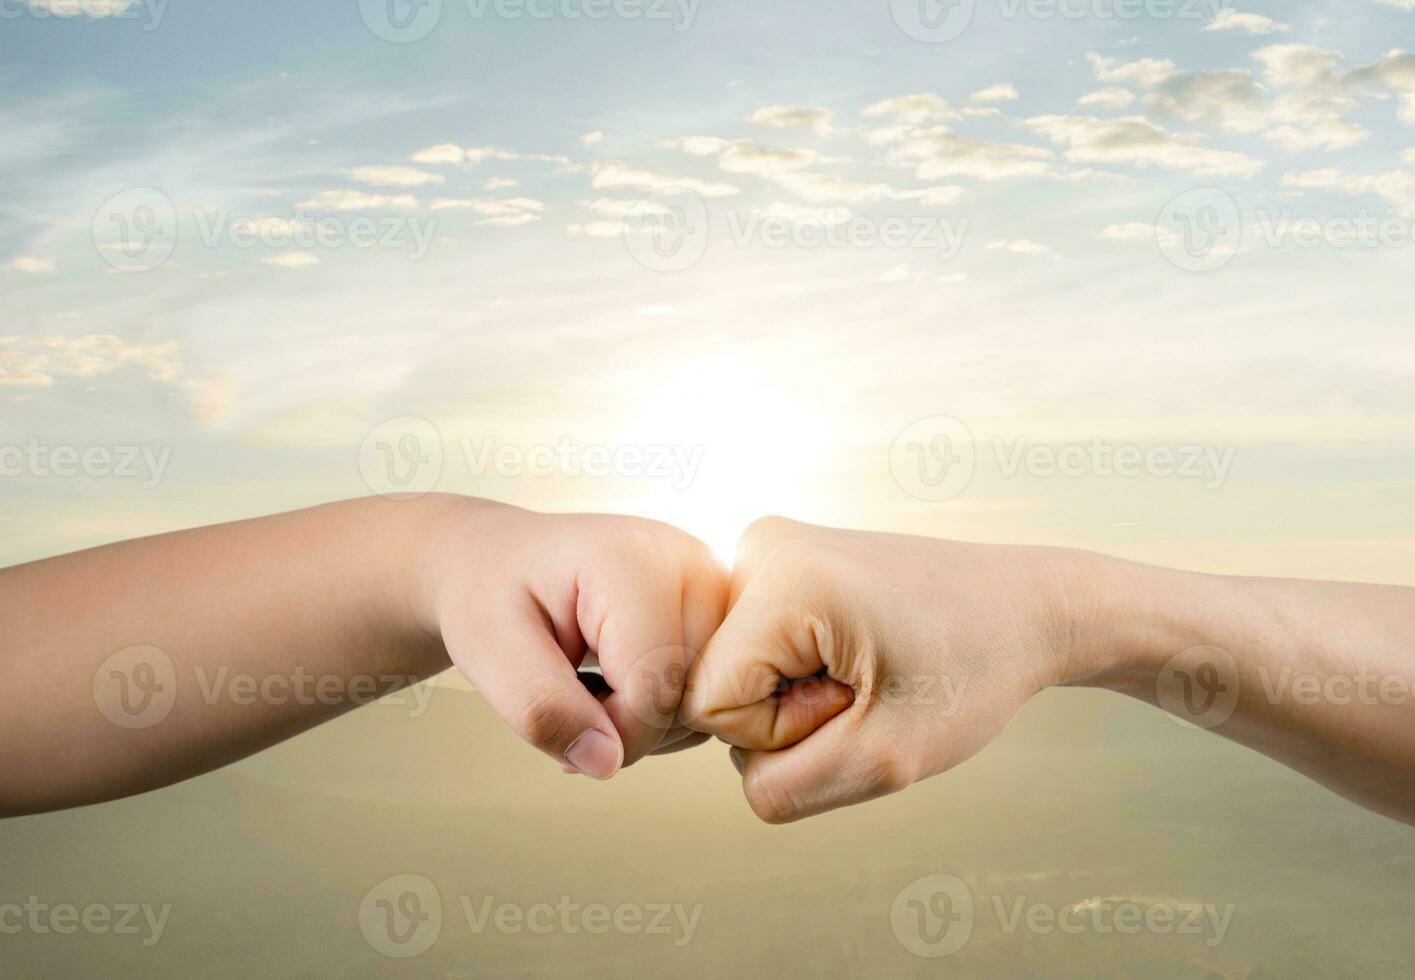 fist bump and knuckle hand children and adult photo